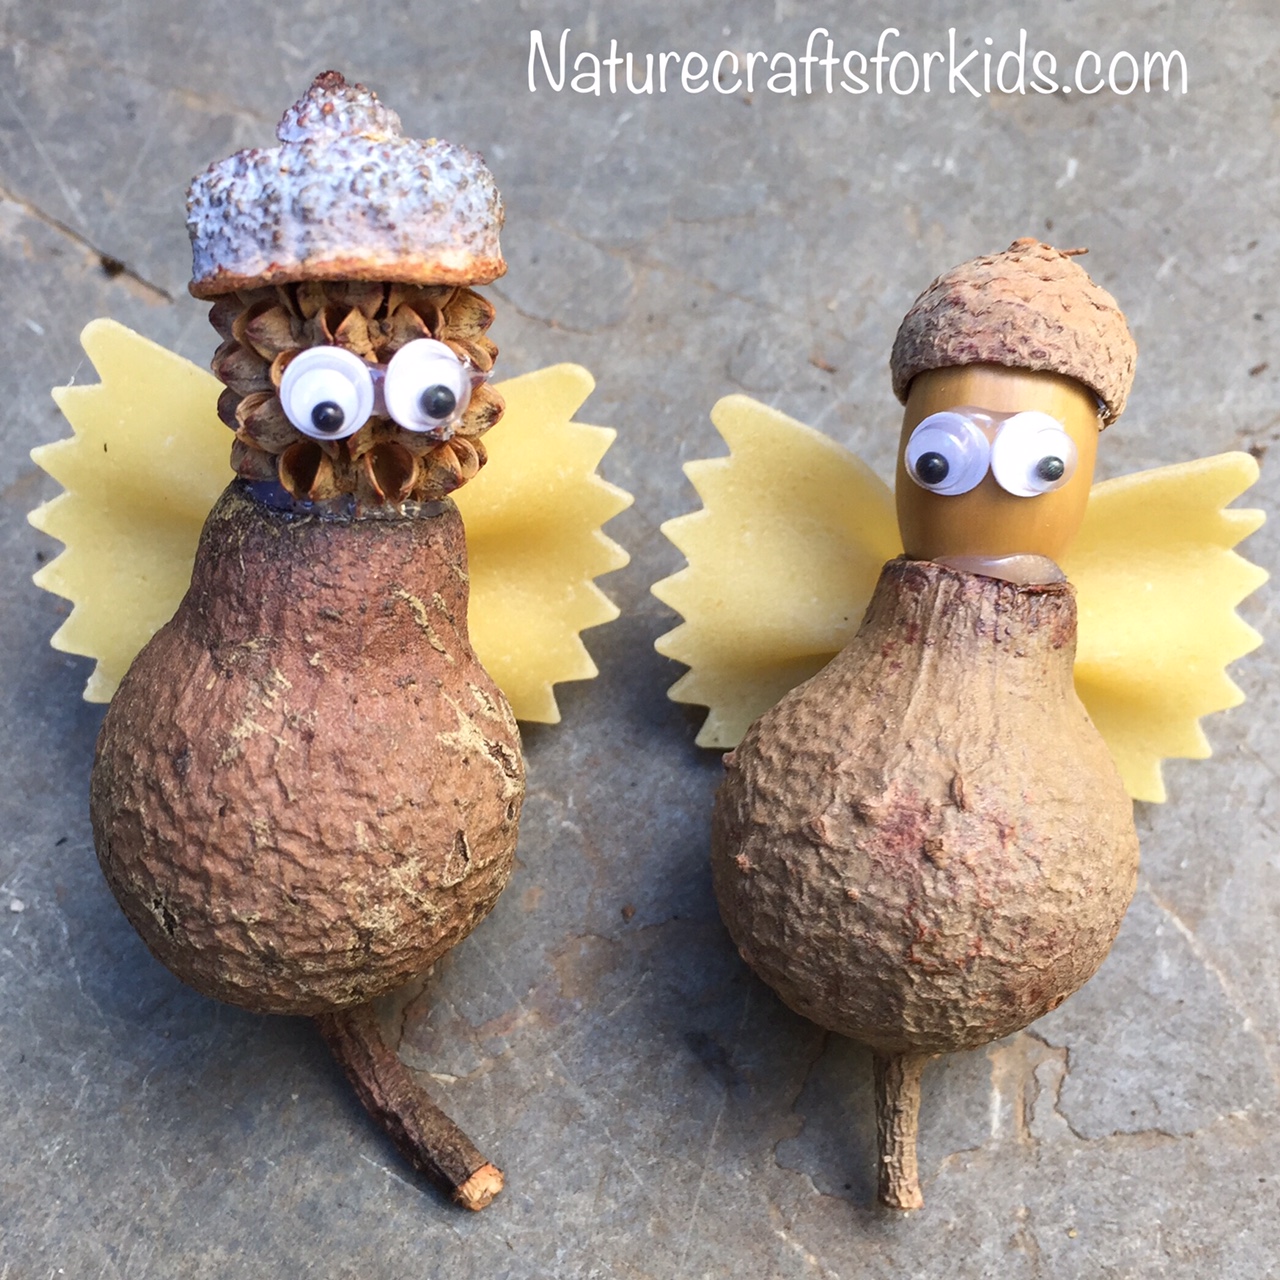 Kids Nature Crafts - Angels made with gumnuts